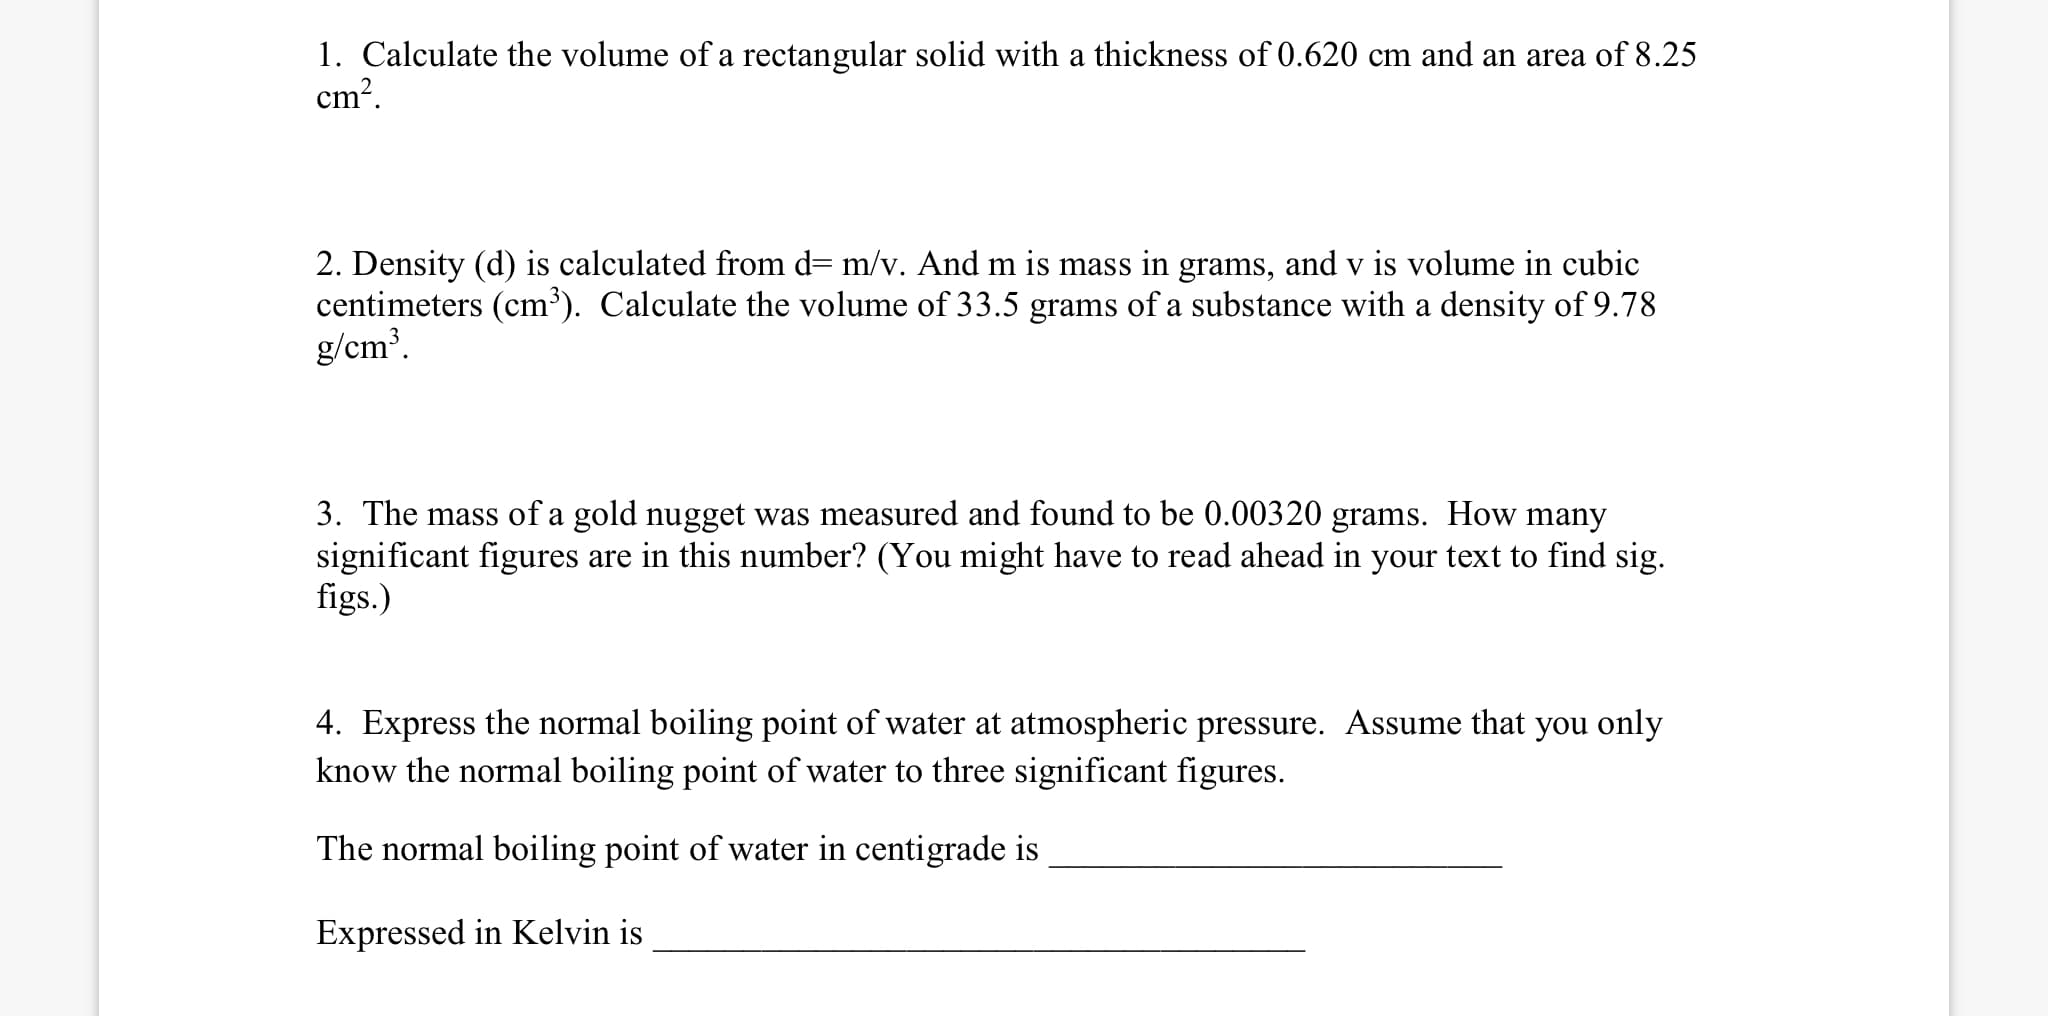 3. The mass of a gold nugget was measured and found to be 0.00320 grams. How many
significant figures are in this number? (You might have to read ahead in your text to find sig.
figs.)
